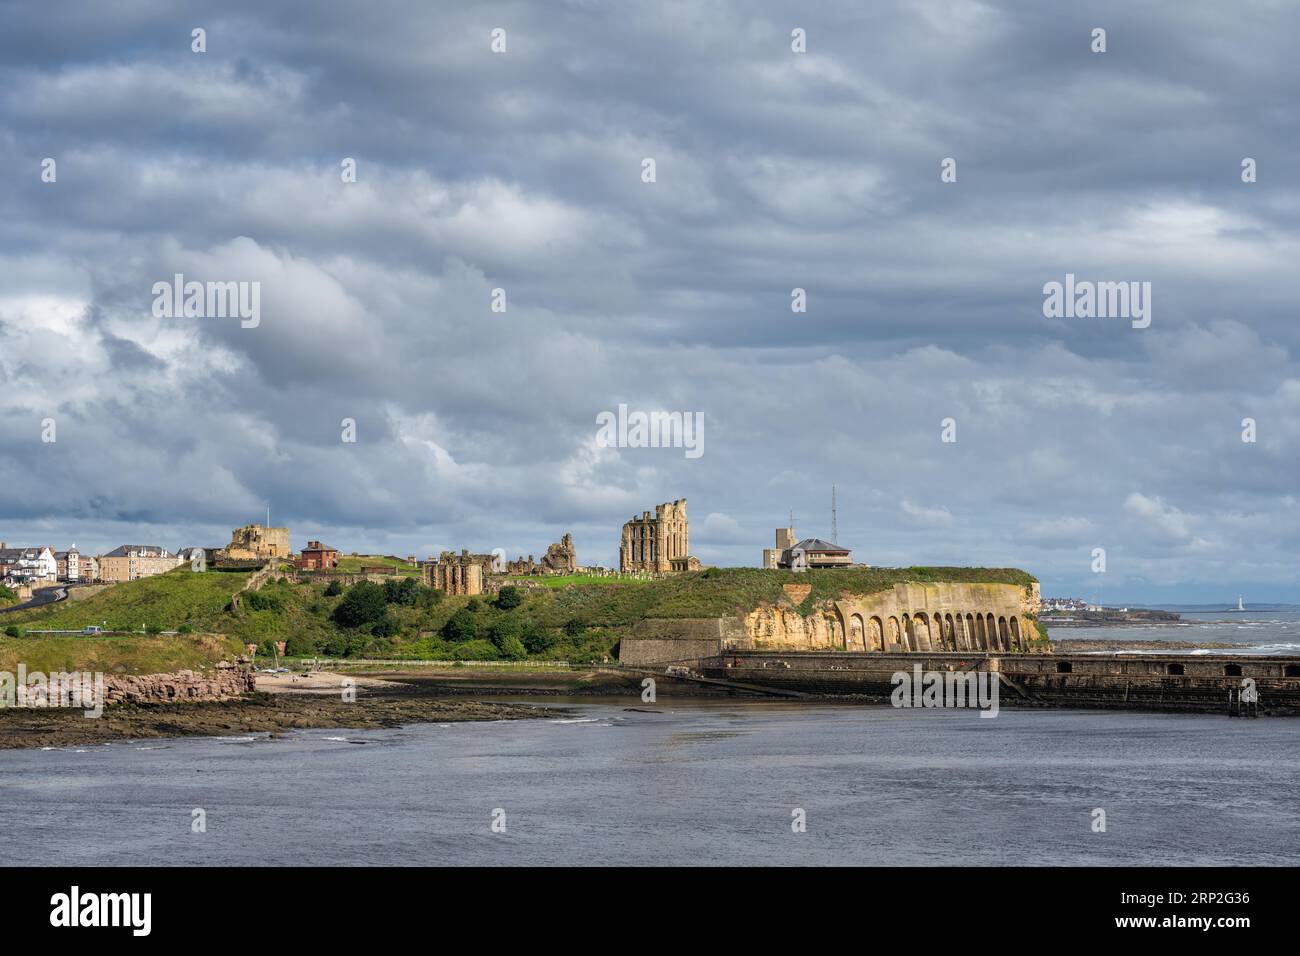 View over the River Tyne with the ruins of Tynemouth Priory and Castle, North Shields, Newcastle upon Tyne, Northumberland, England, United Kingdom Stock Photo